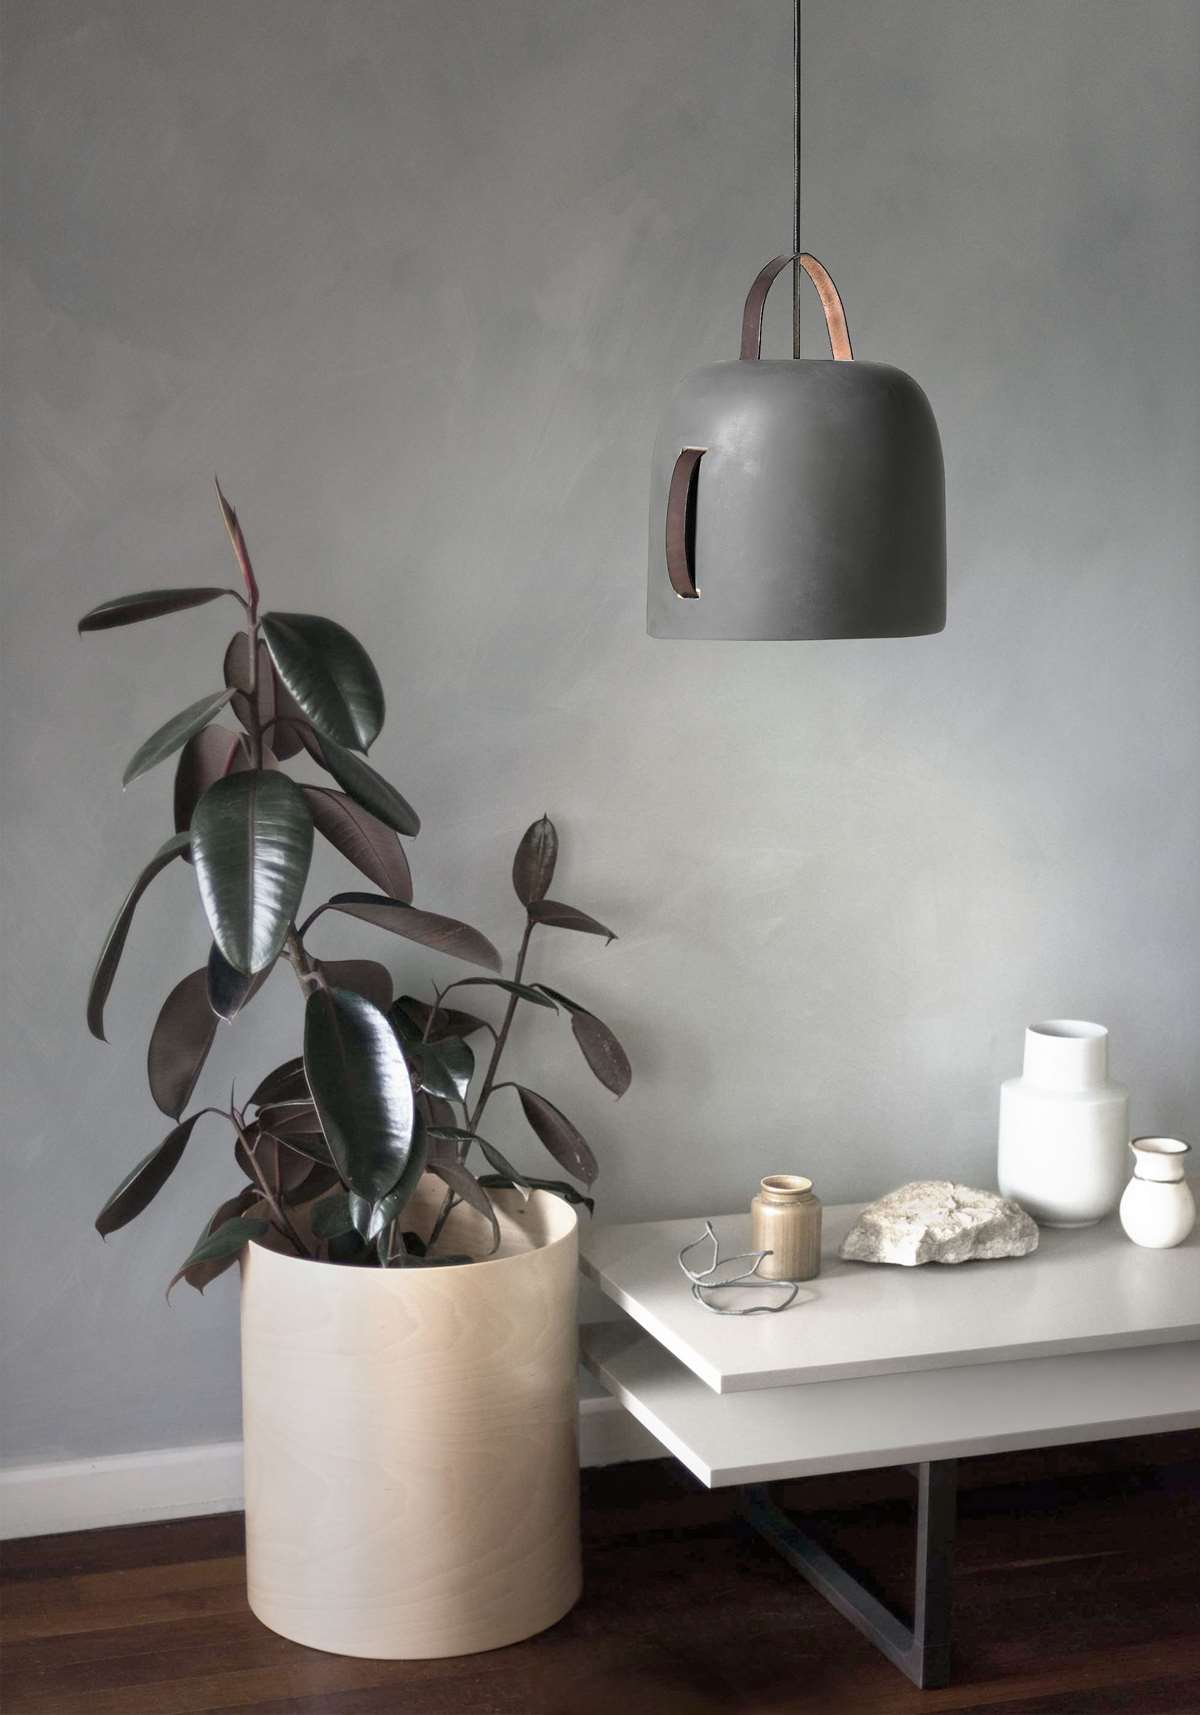 Cowbell Lamp by Silvia Ceñal for Plussmi